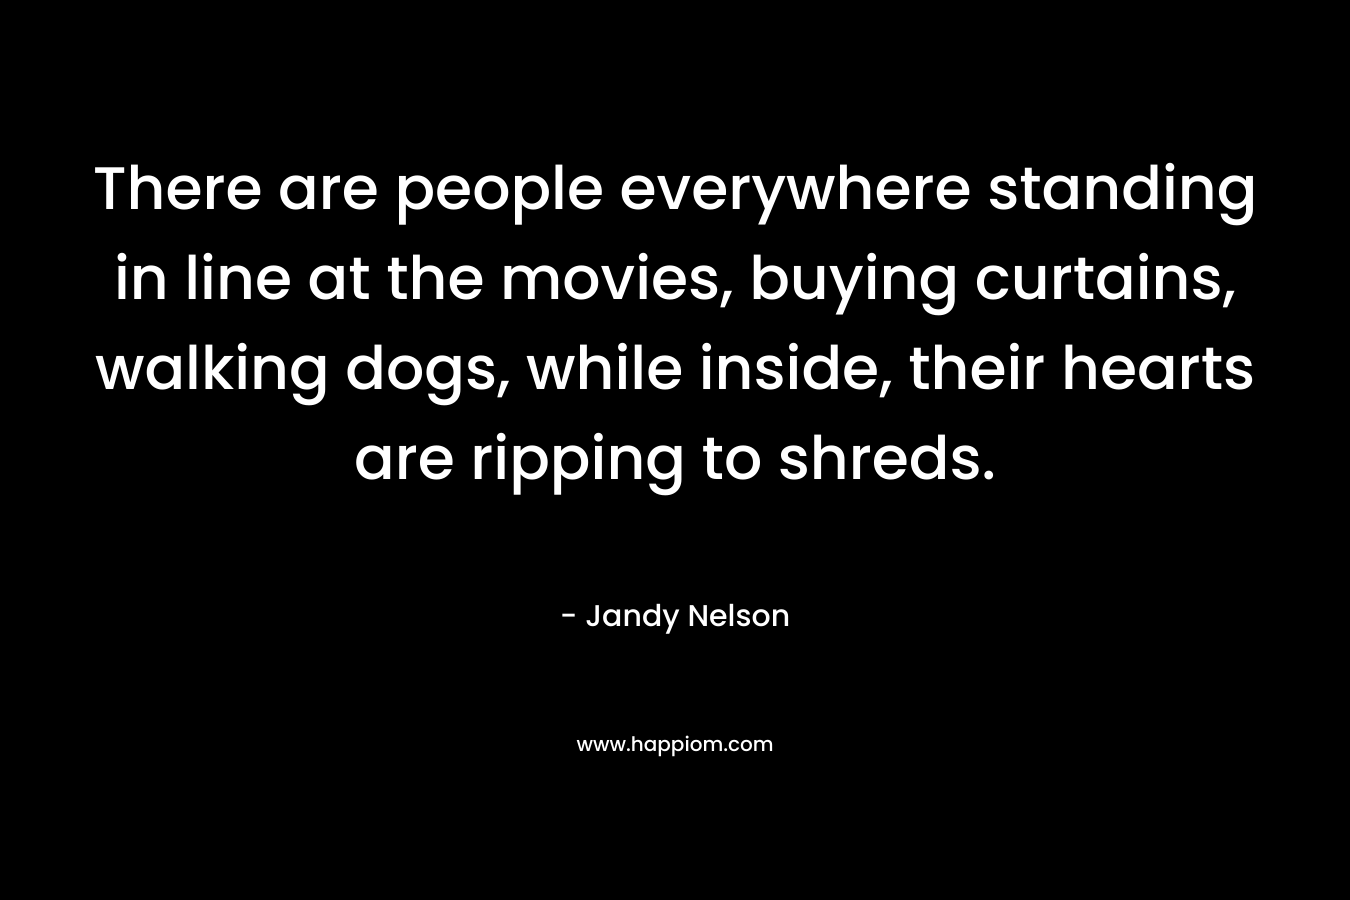 There are people everywhere standing in line at the movies, buying curtains, walking dogs, while inside, their hearts are ripping to shreds. – Jandy Nelson